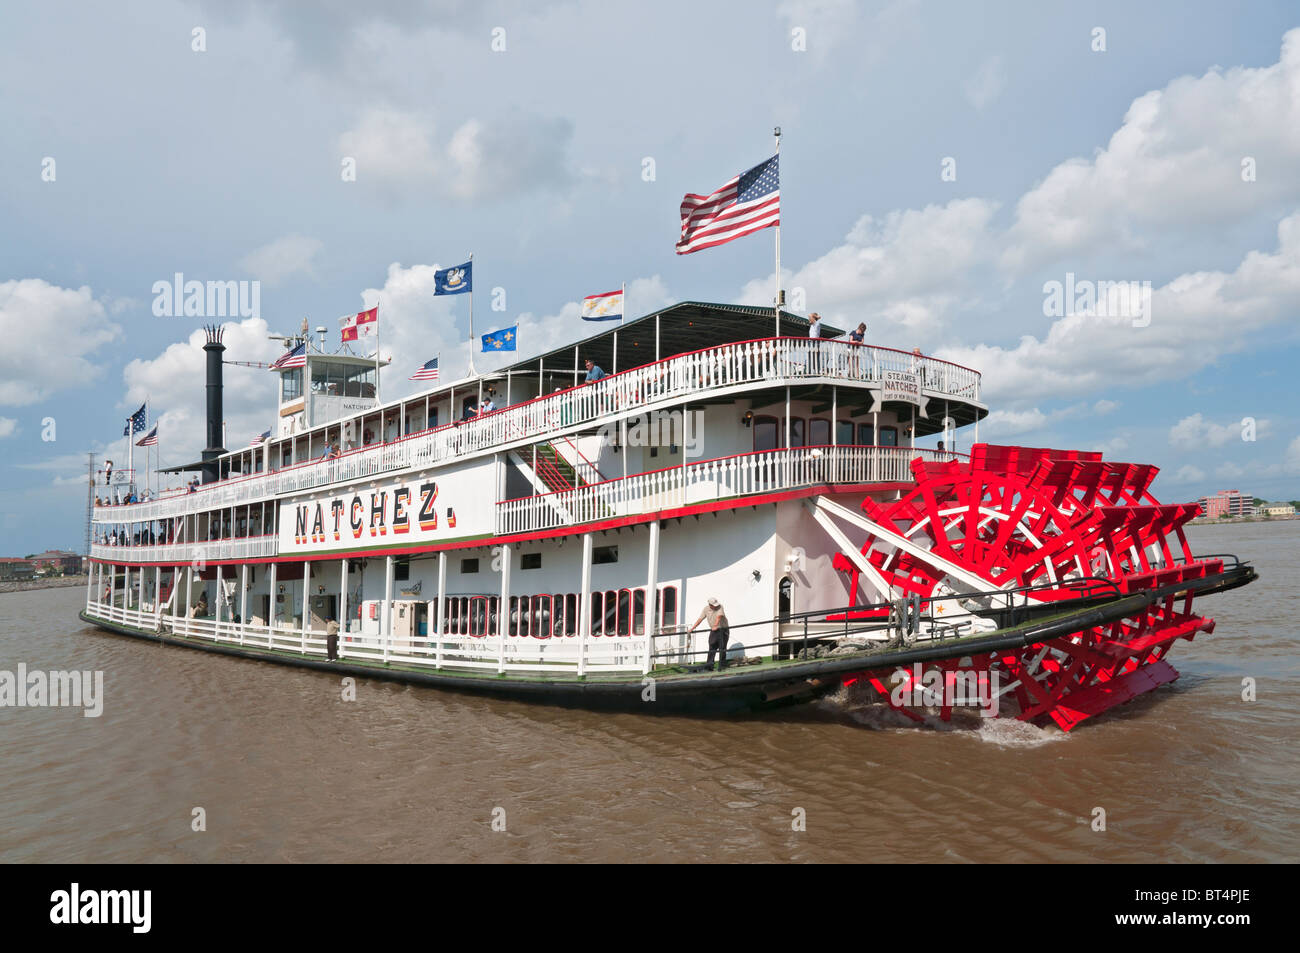 Louisiana, New Orleans, Steamboat Natchez, Mississippi River tour boat, steam powered sternwheeler launched 1975 Stock Photo